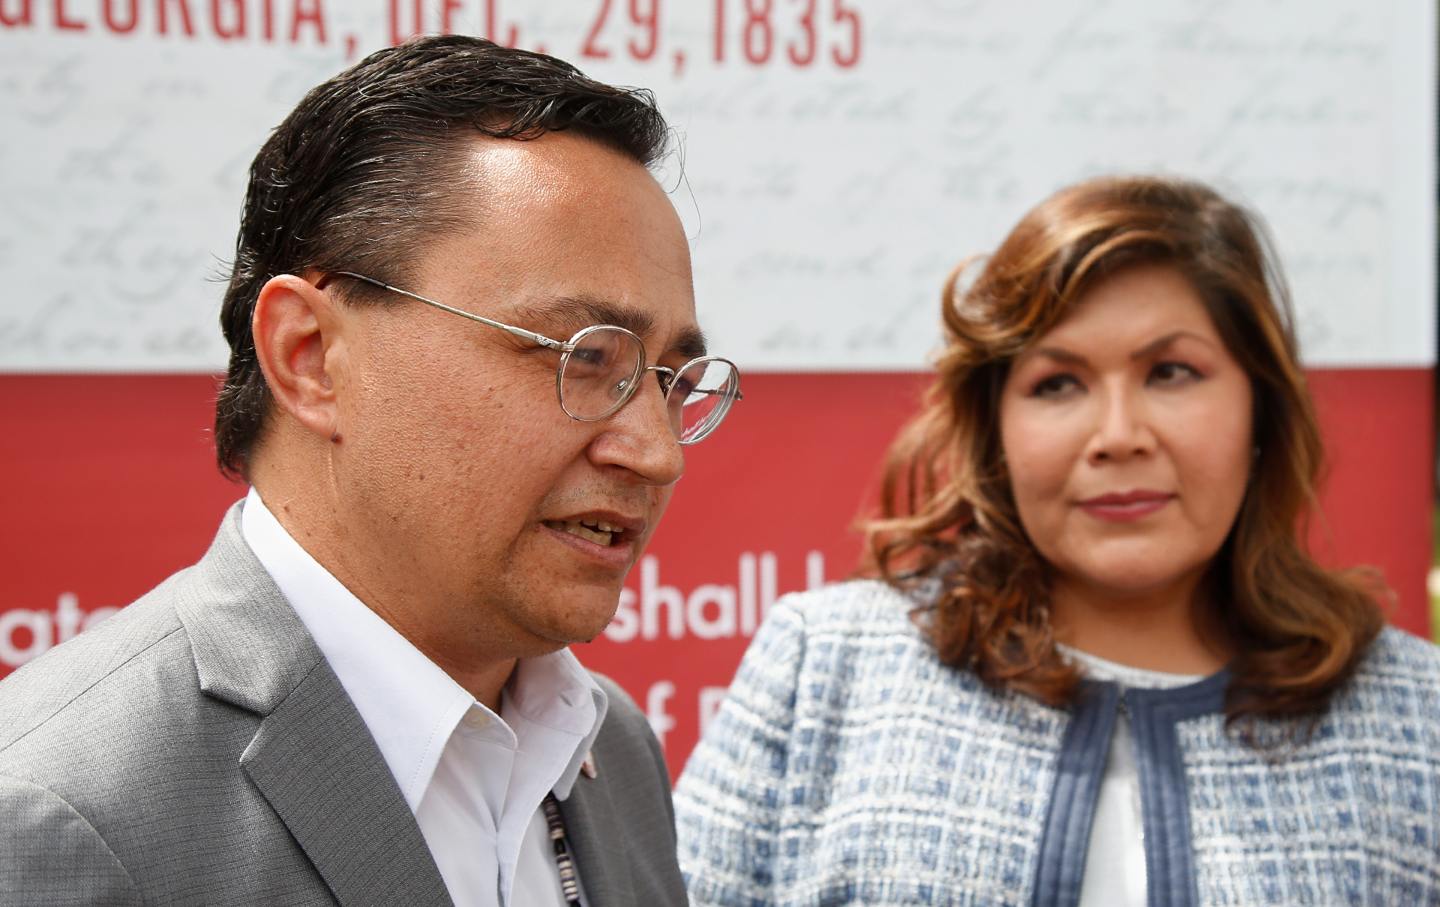 Cherokee Nation Principal Chief Chuck Hoskin Jr., left, answers a question for the media following his announcement that he is nominating Kimberly Teehee, right, as a Cherokee Nation delegate to the U.S. House, in Tahlequah, Okla., Thursday, Aug. 22, 2019.